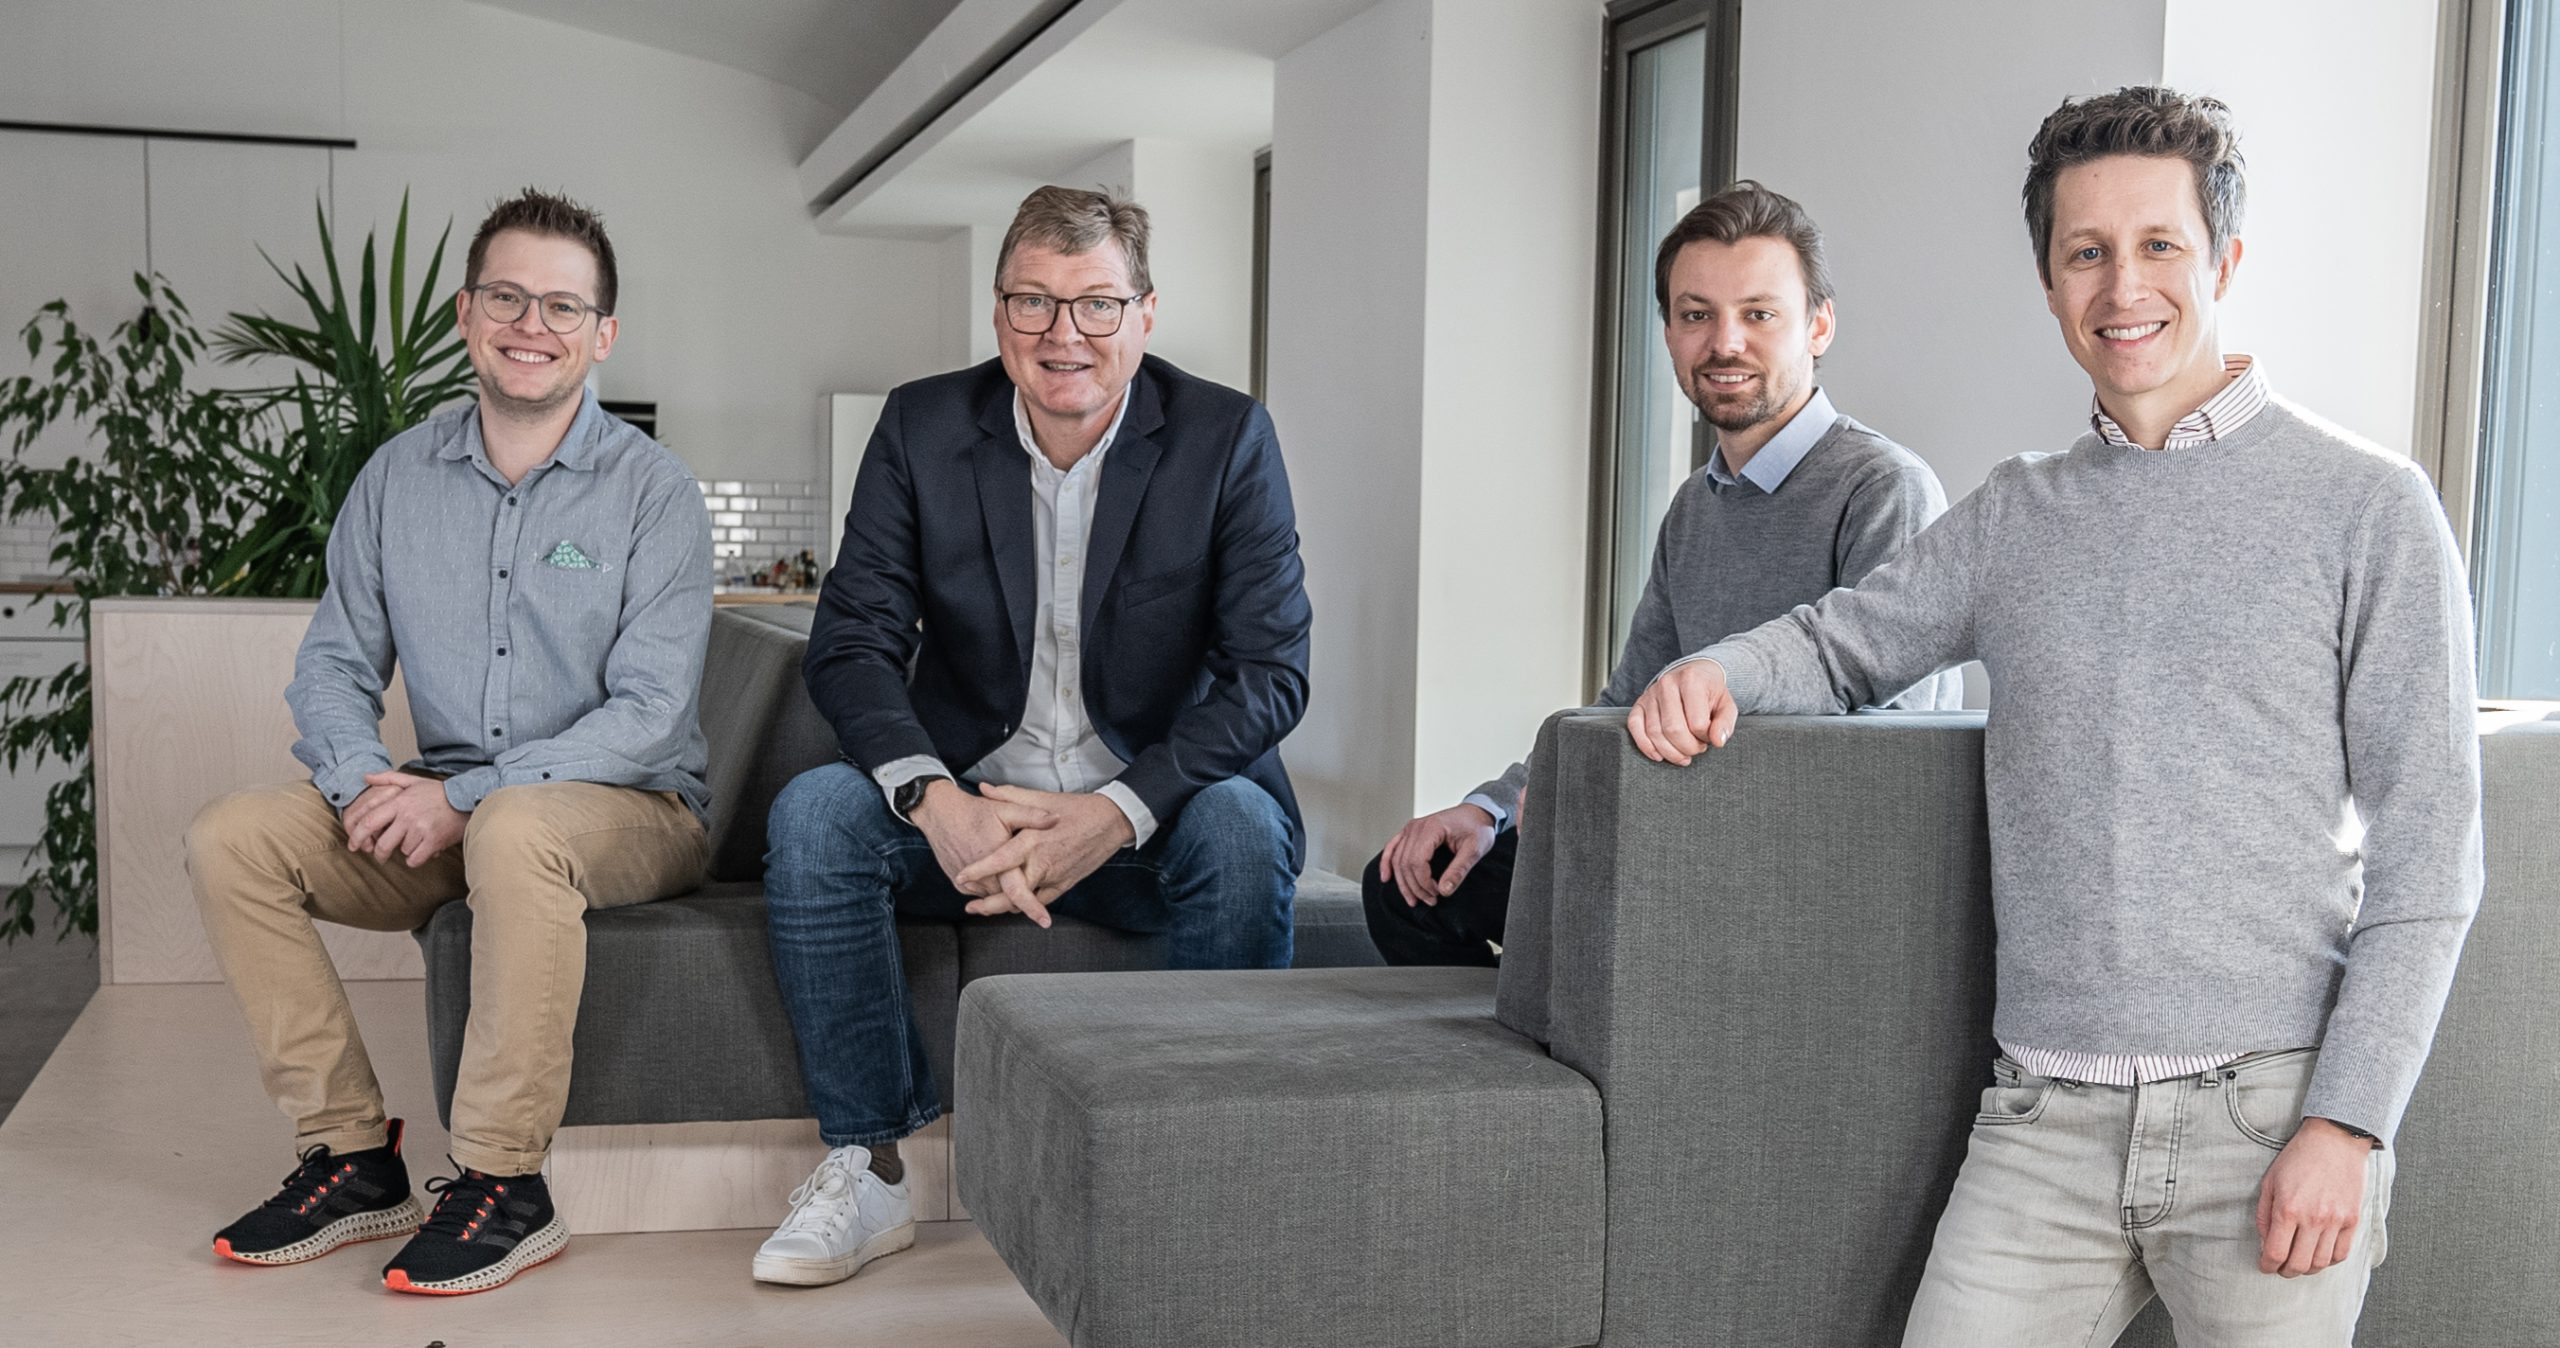 DyeMansion’s founders Felix Ewald (left) and Philipp Kramer (second from right) with the two new board members Peter Nietzer (second from left) and Felix Reinshagen (right). Photo via DyeMansion.